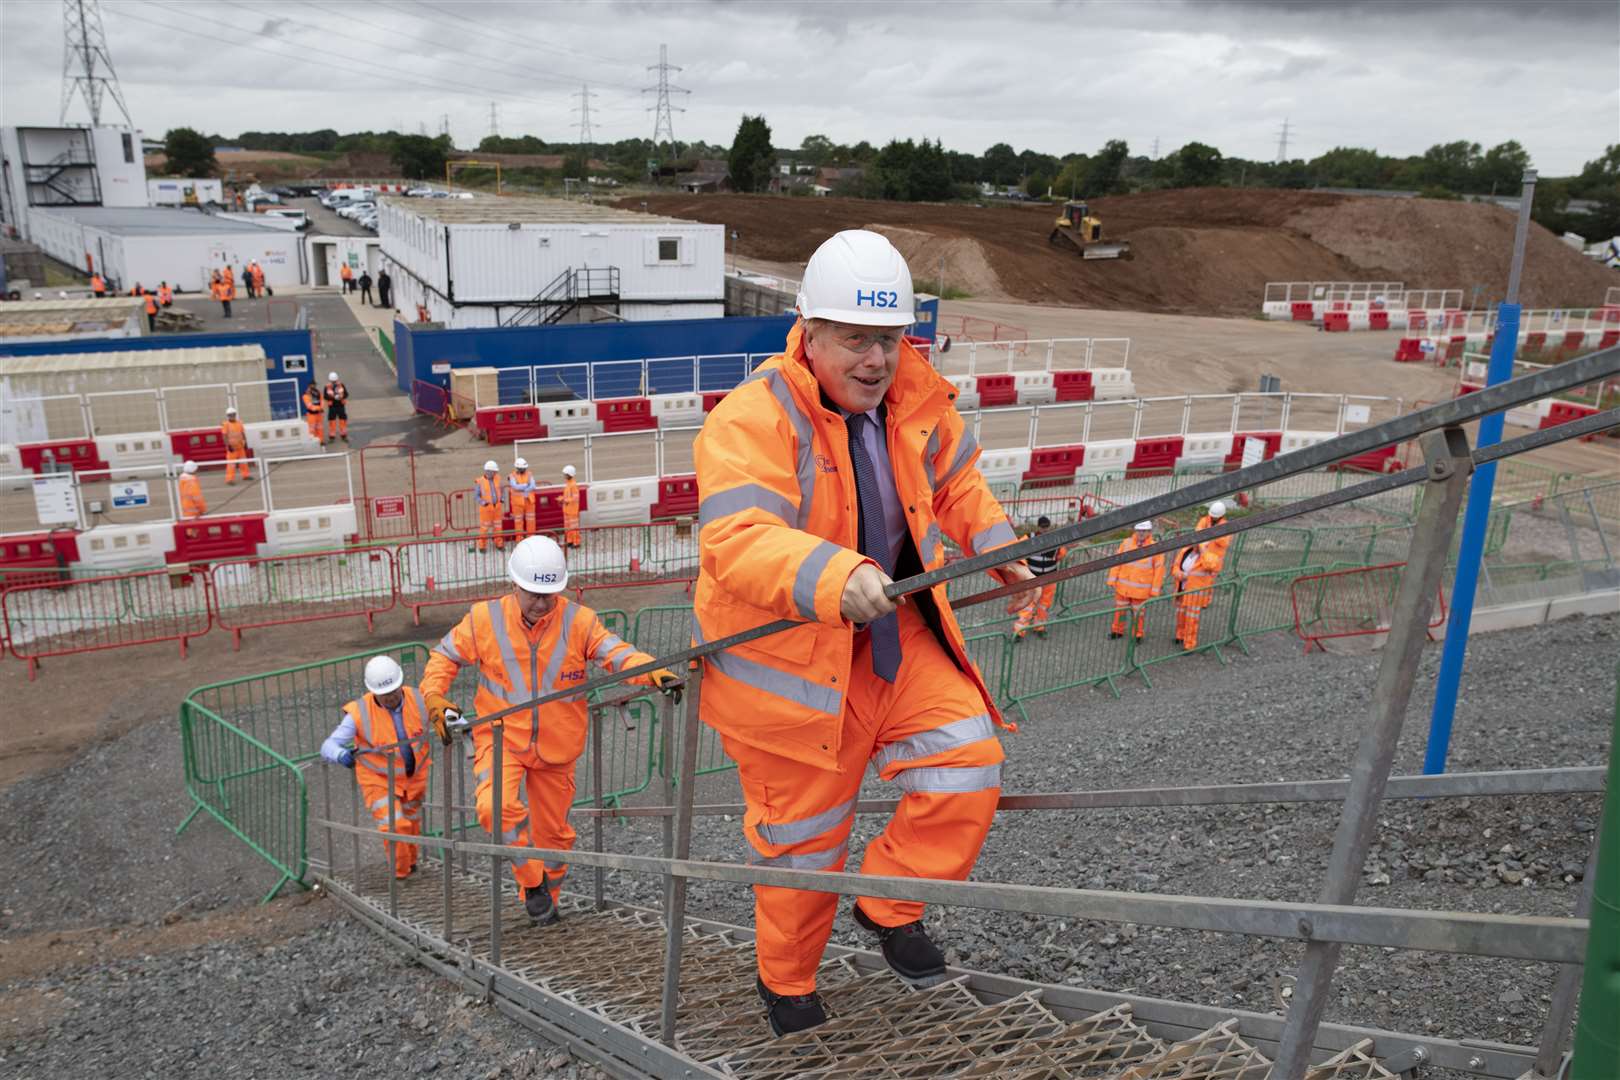 Boris Johnson during a visit to the HS2 Solihull Interchange building site (Andrew Fox/Daily Telegraph/PA)